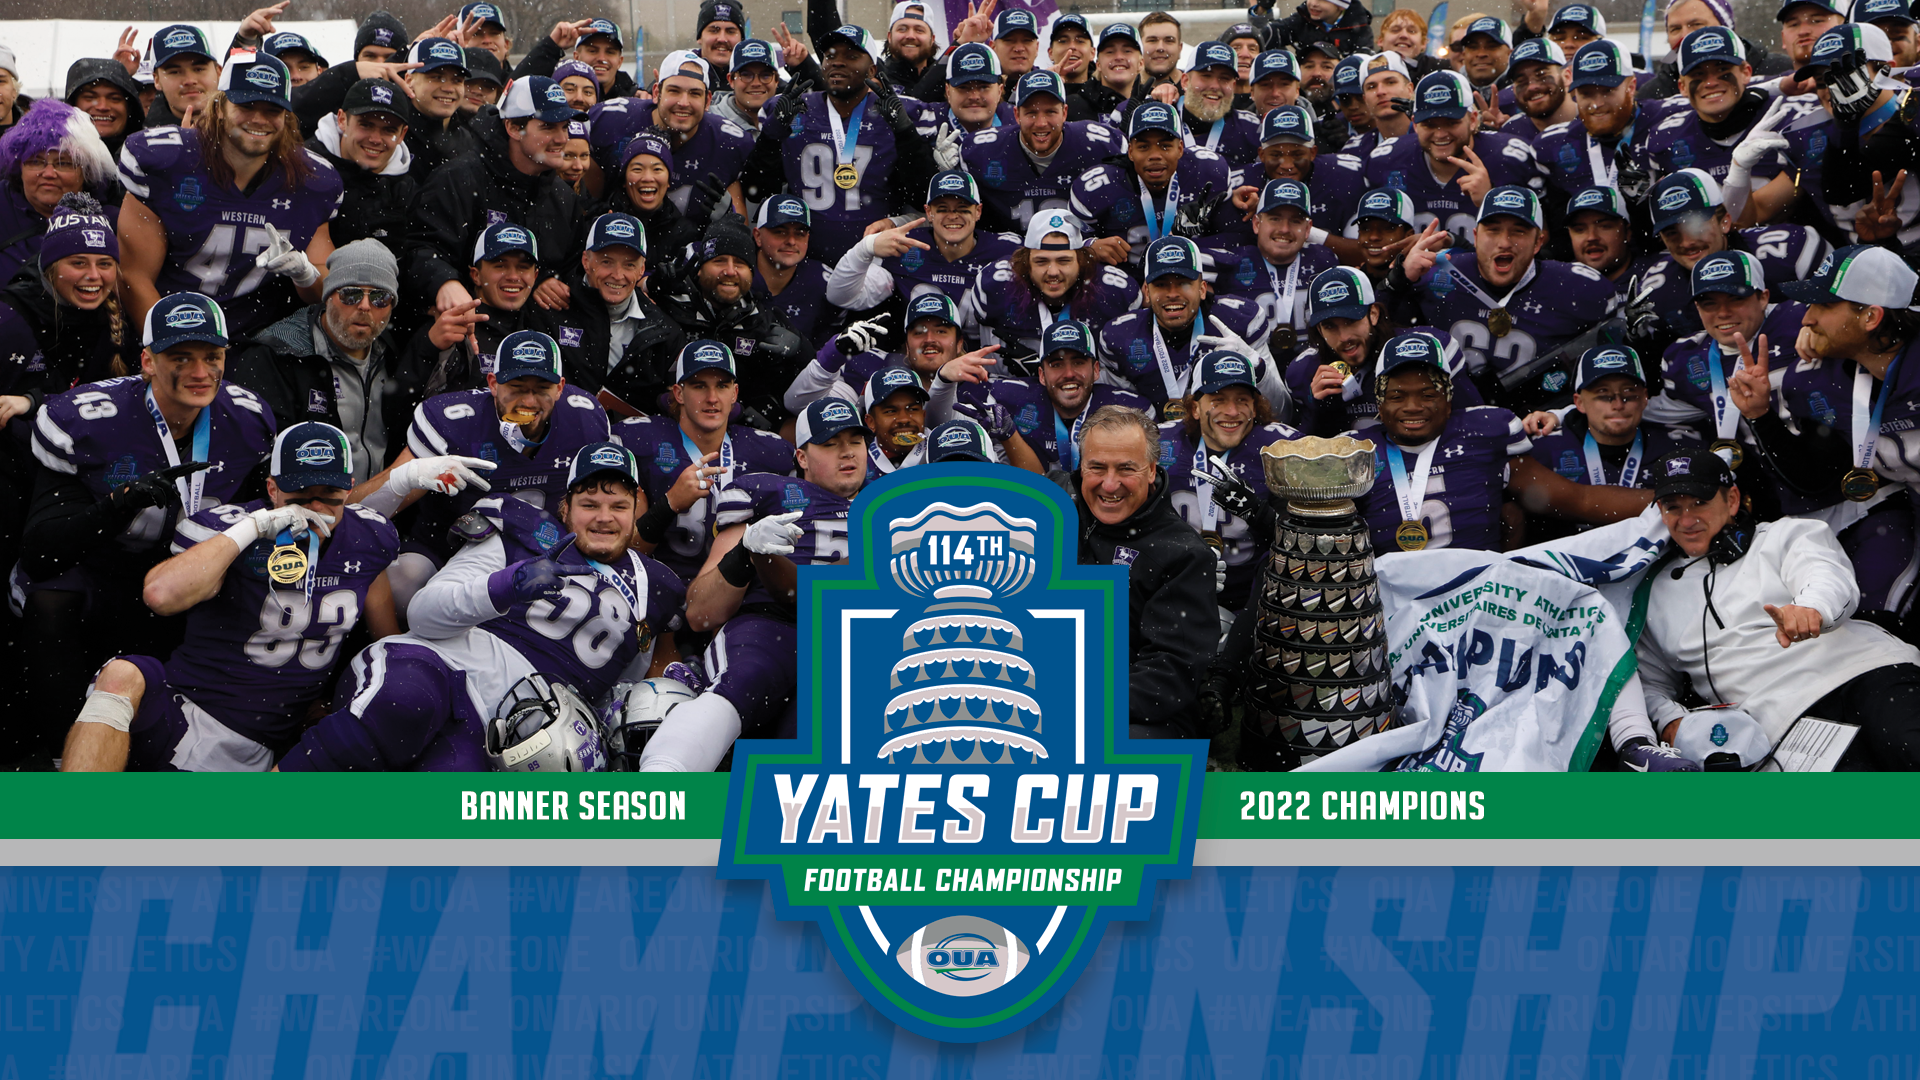 Banner Season: Relentless ground game gets Western their 34th Yates Cup in program history